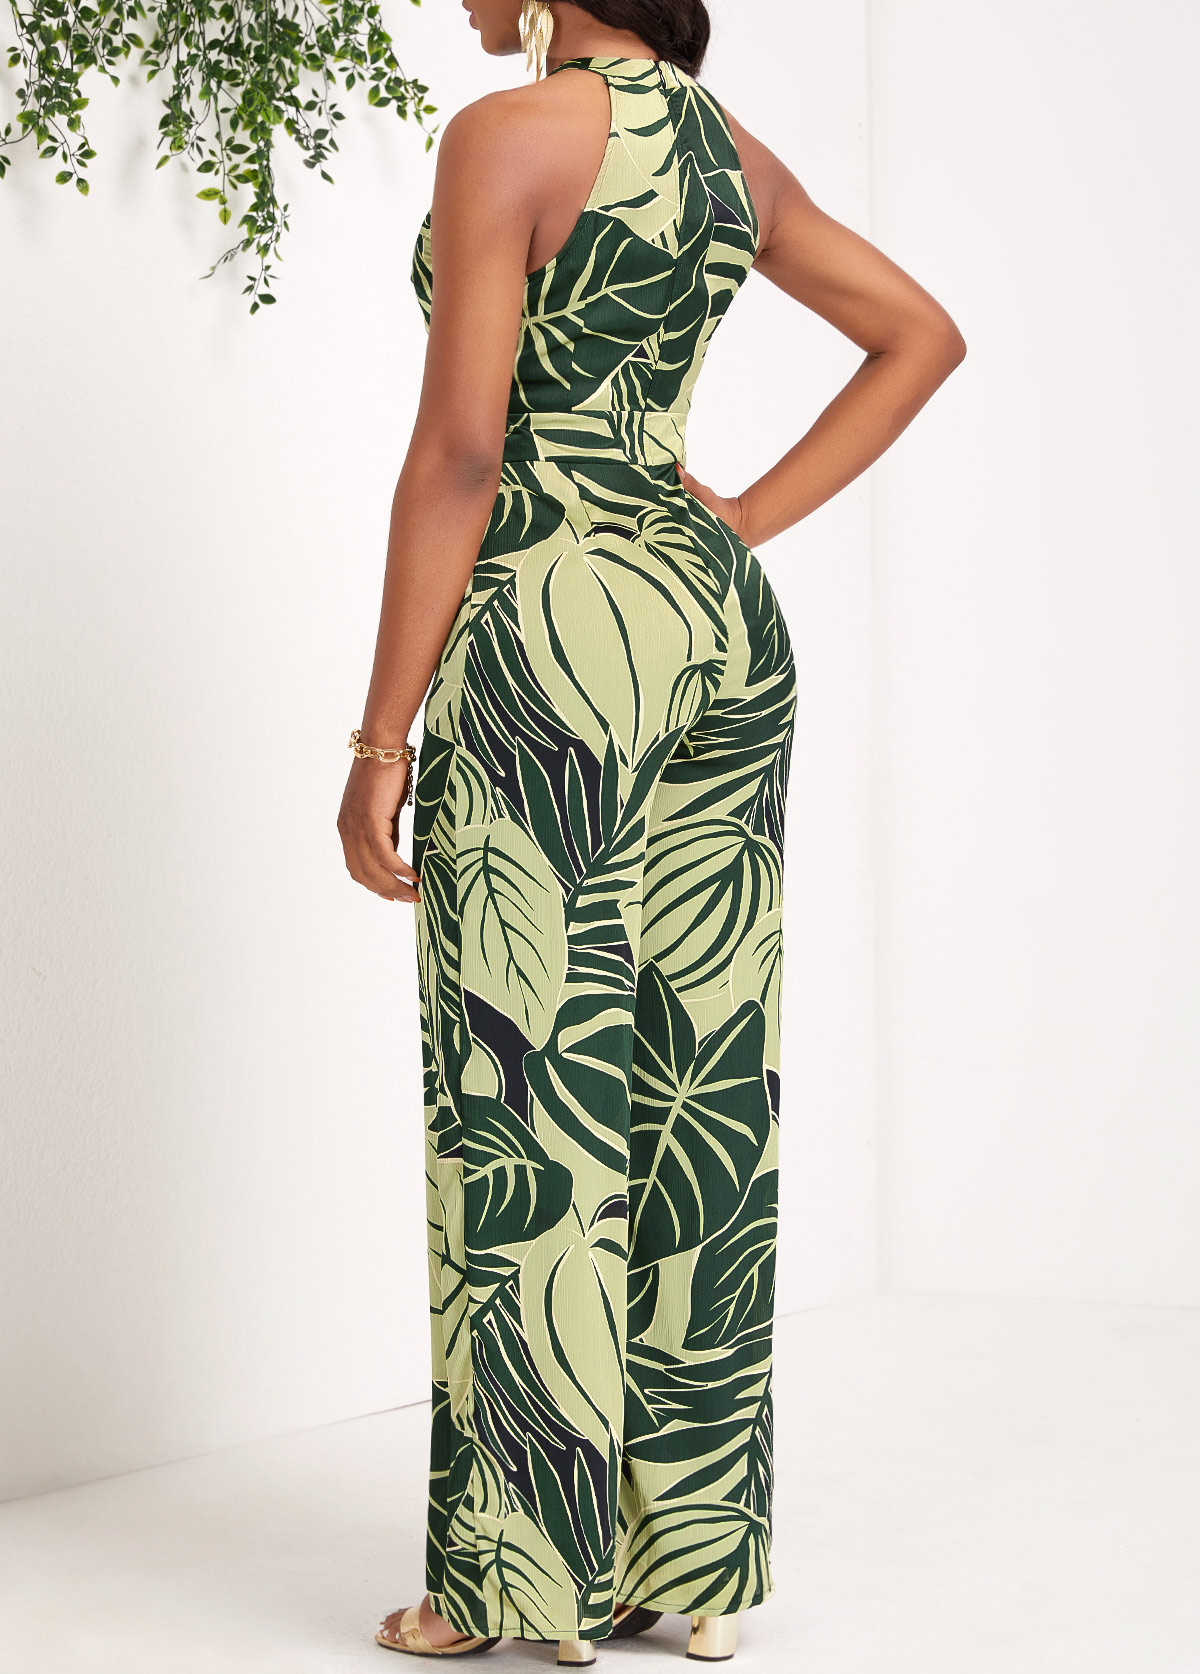 Green Cut Out Leaf Print Long Sleeveless Jumpsuit